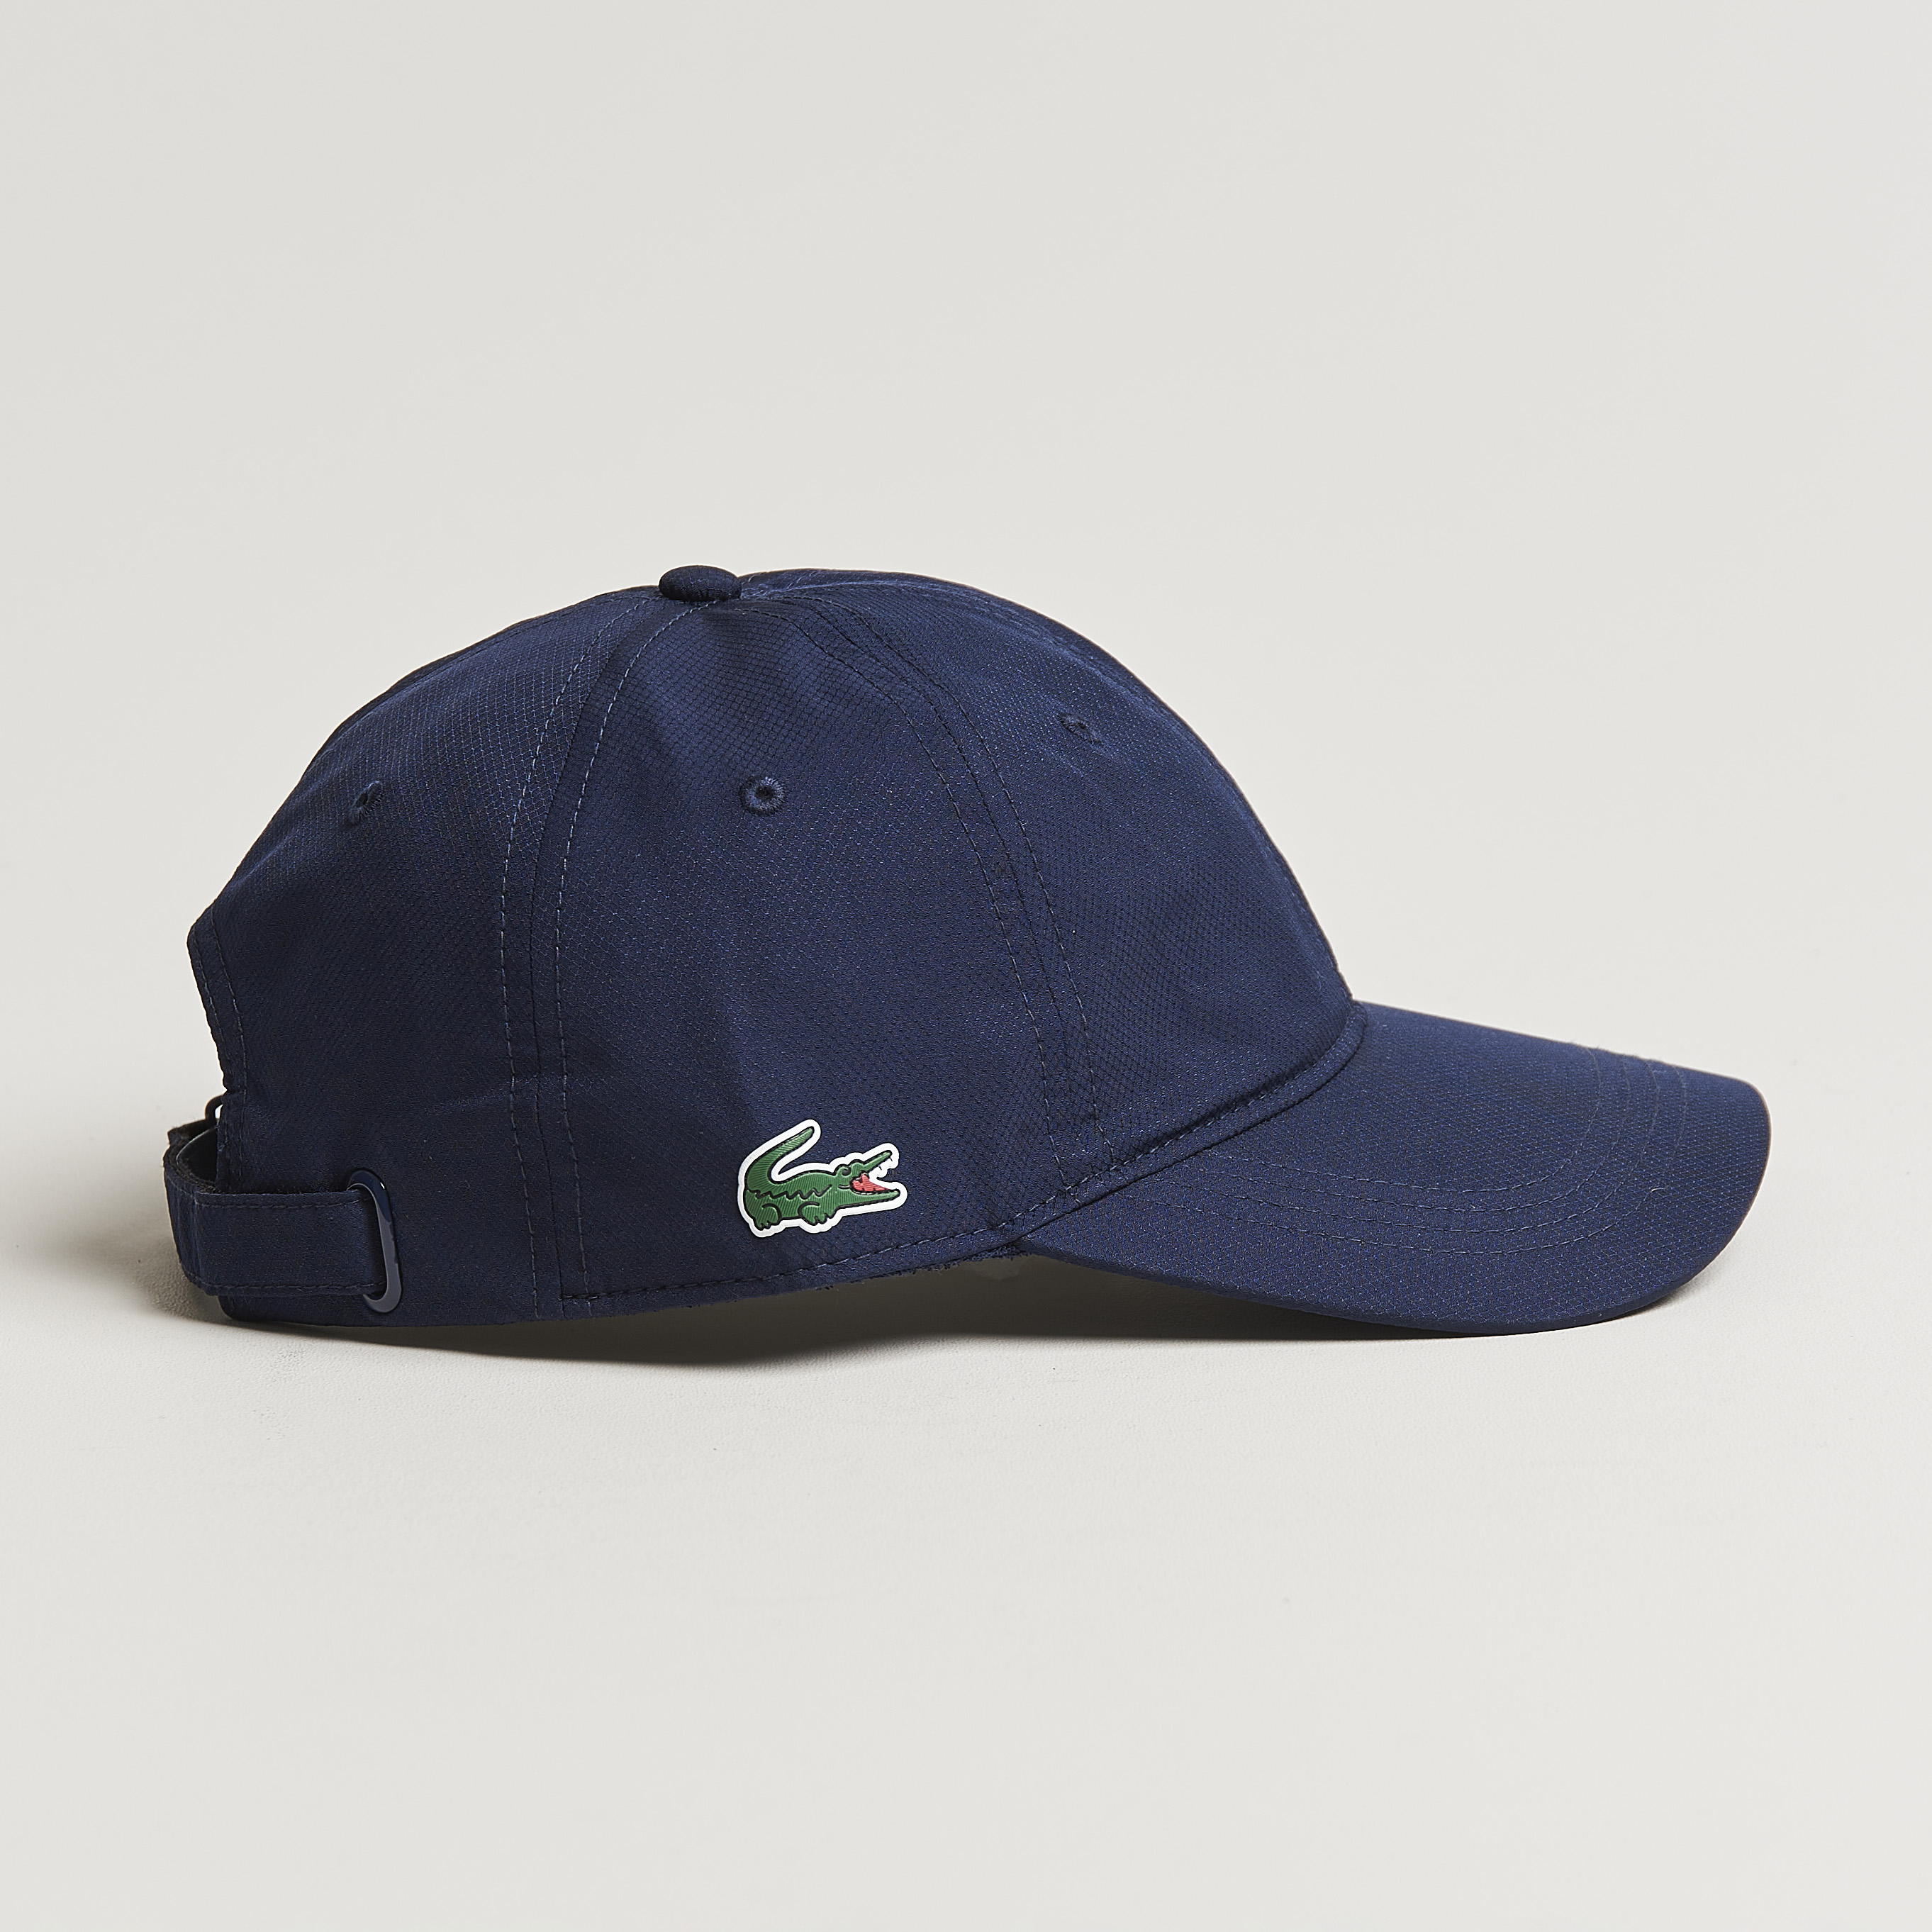 Sport Lacoste Cap at Sports Navy